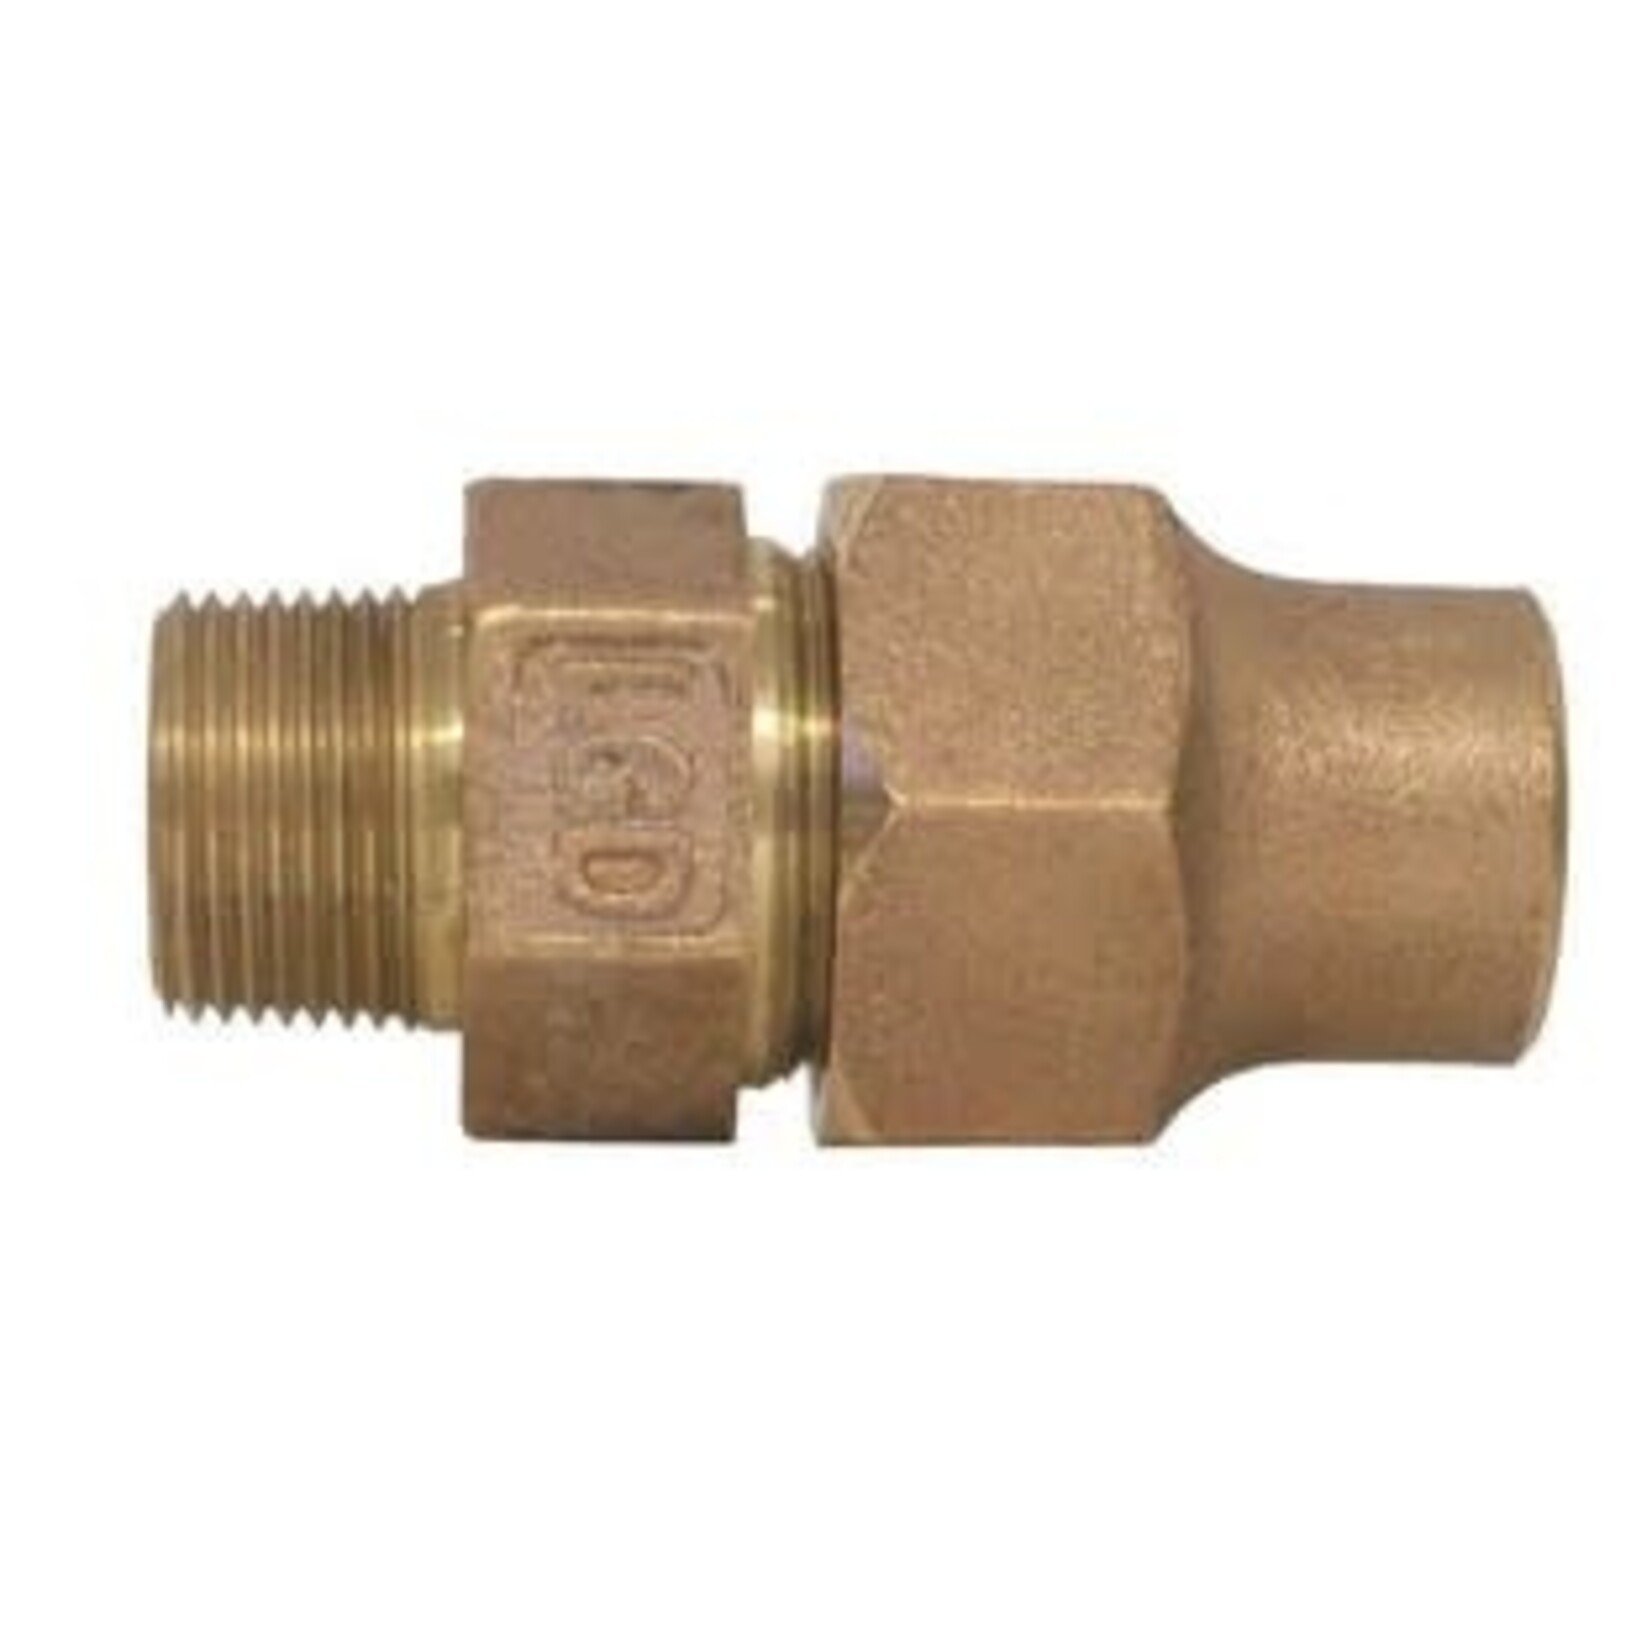 LEGEND VALVE 3/4 IN FLARE X MIP NO LEAD BRONZE ADAPTER COUPLING T-4100NL ( FLARE X MALE )